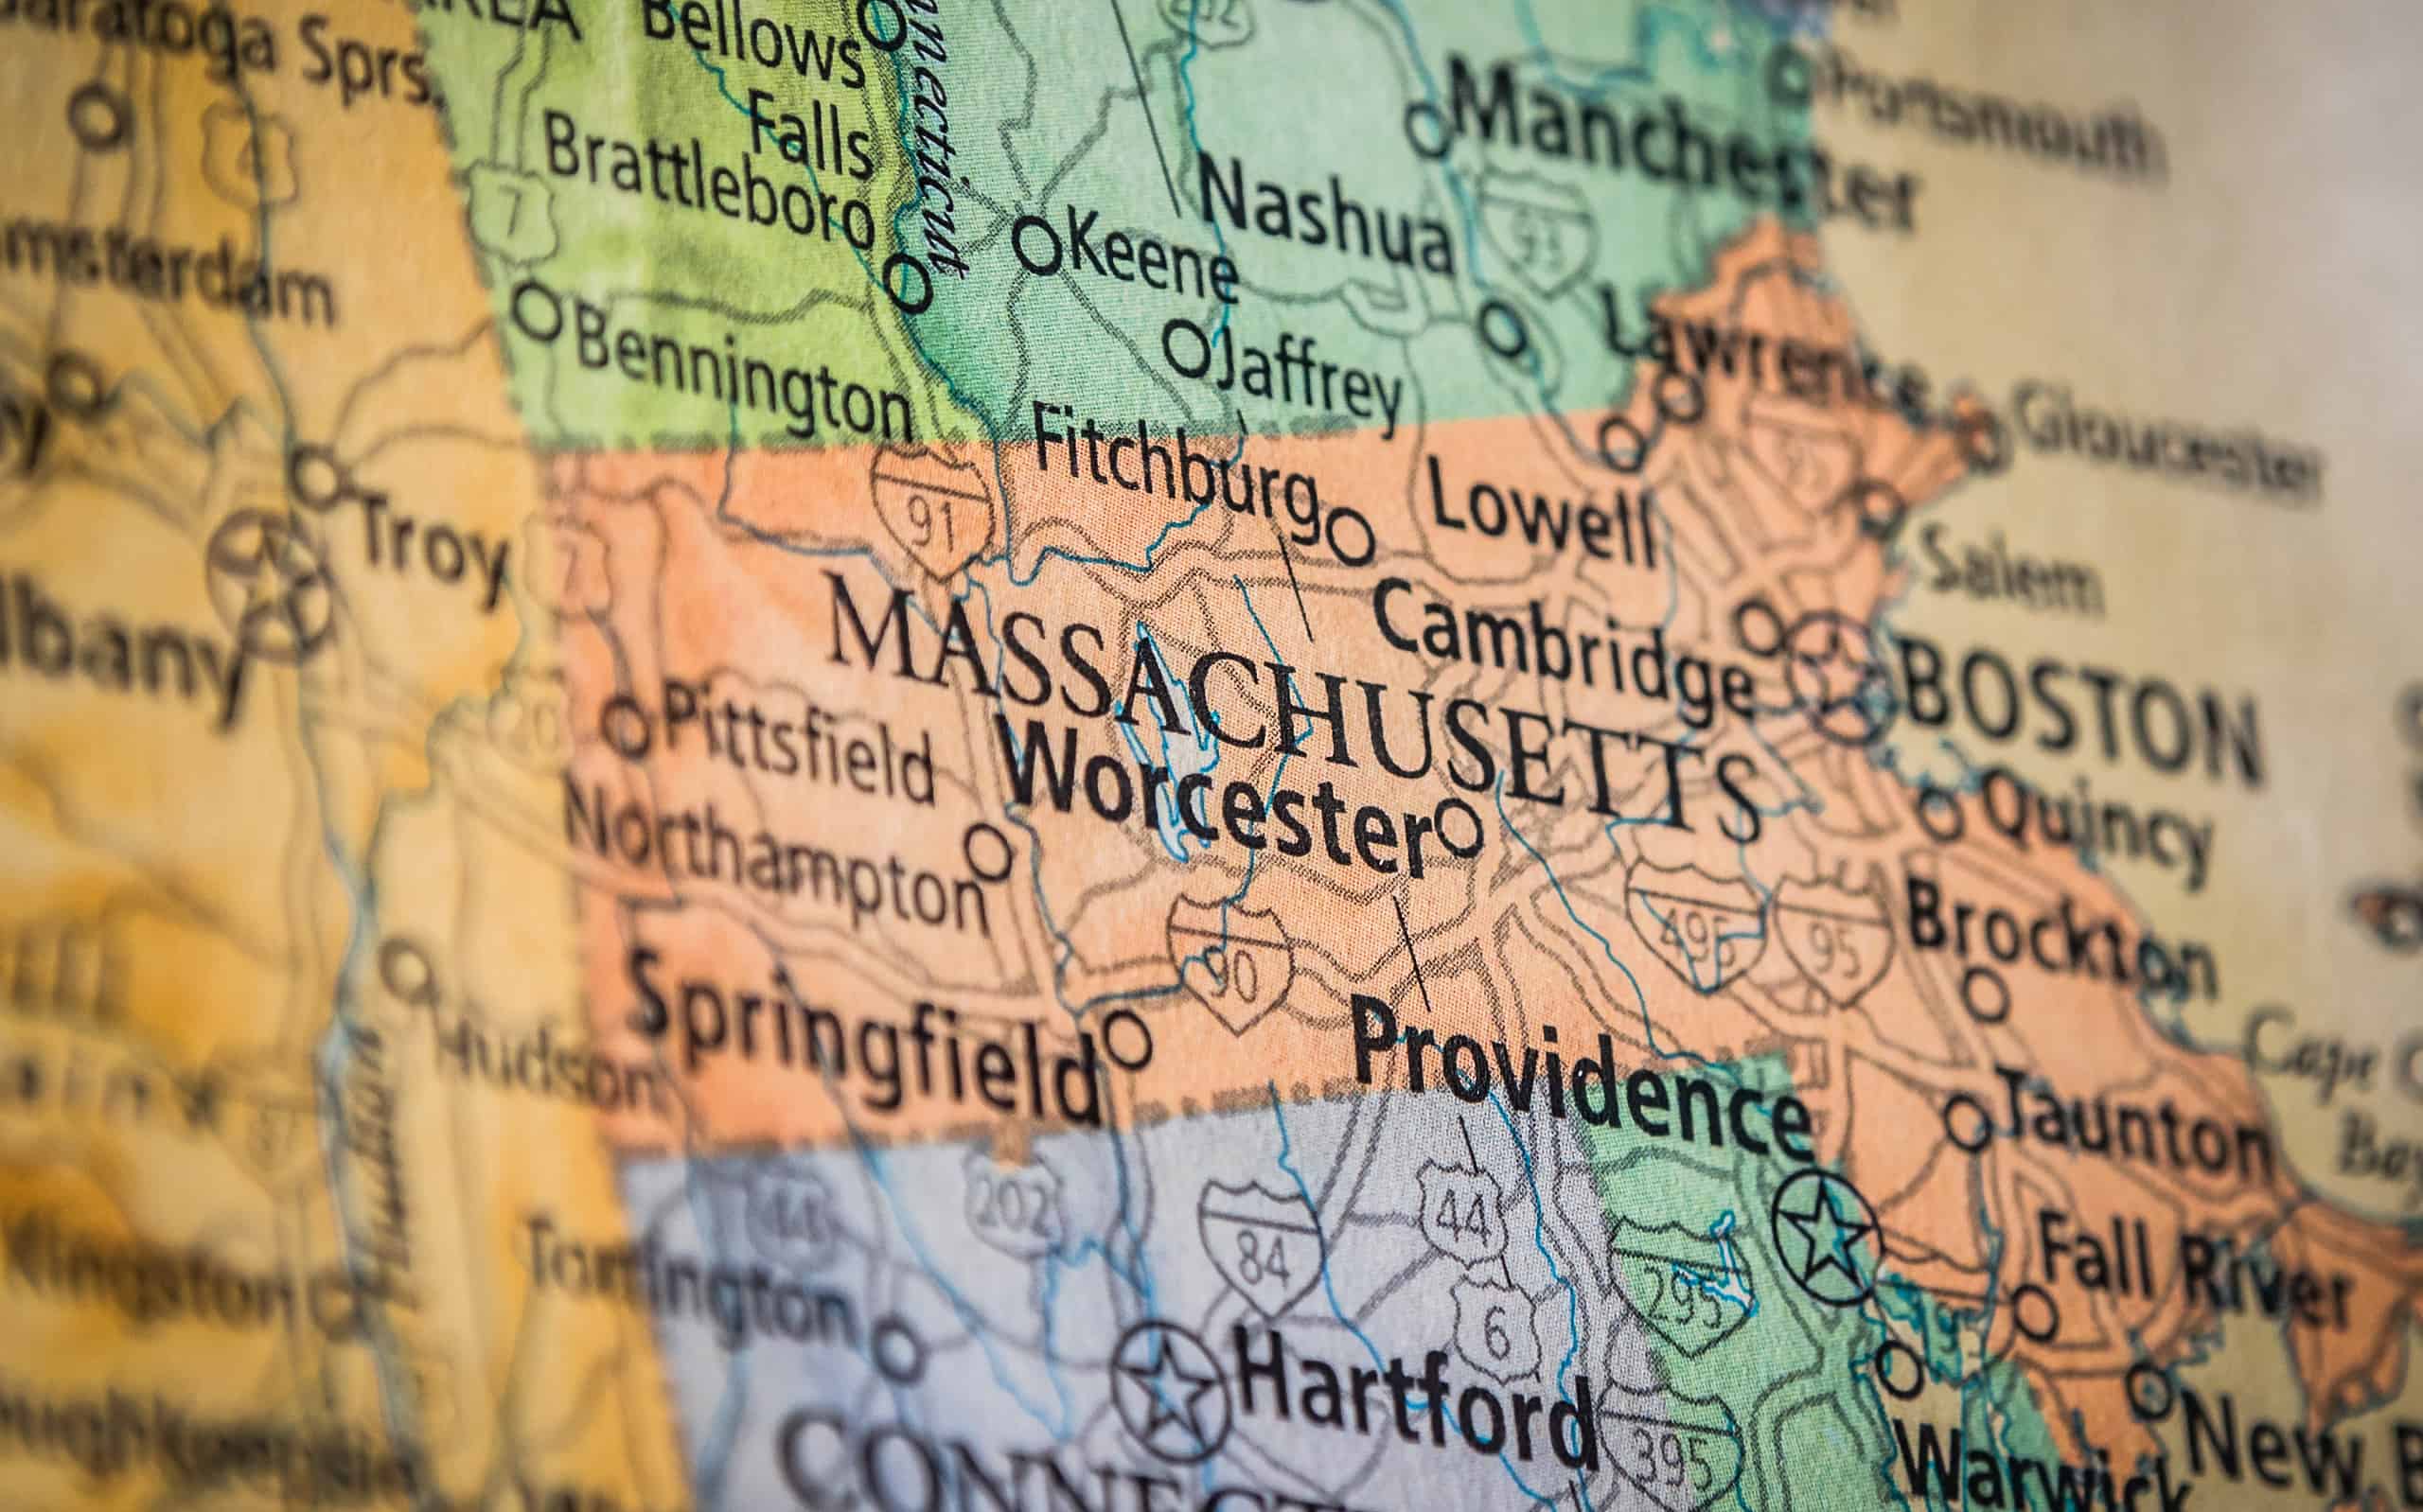 Closeup Selective Focus Of Massachusetts State On A Geographical And Political State Map Of The USA.